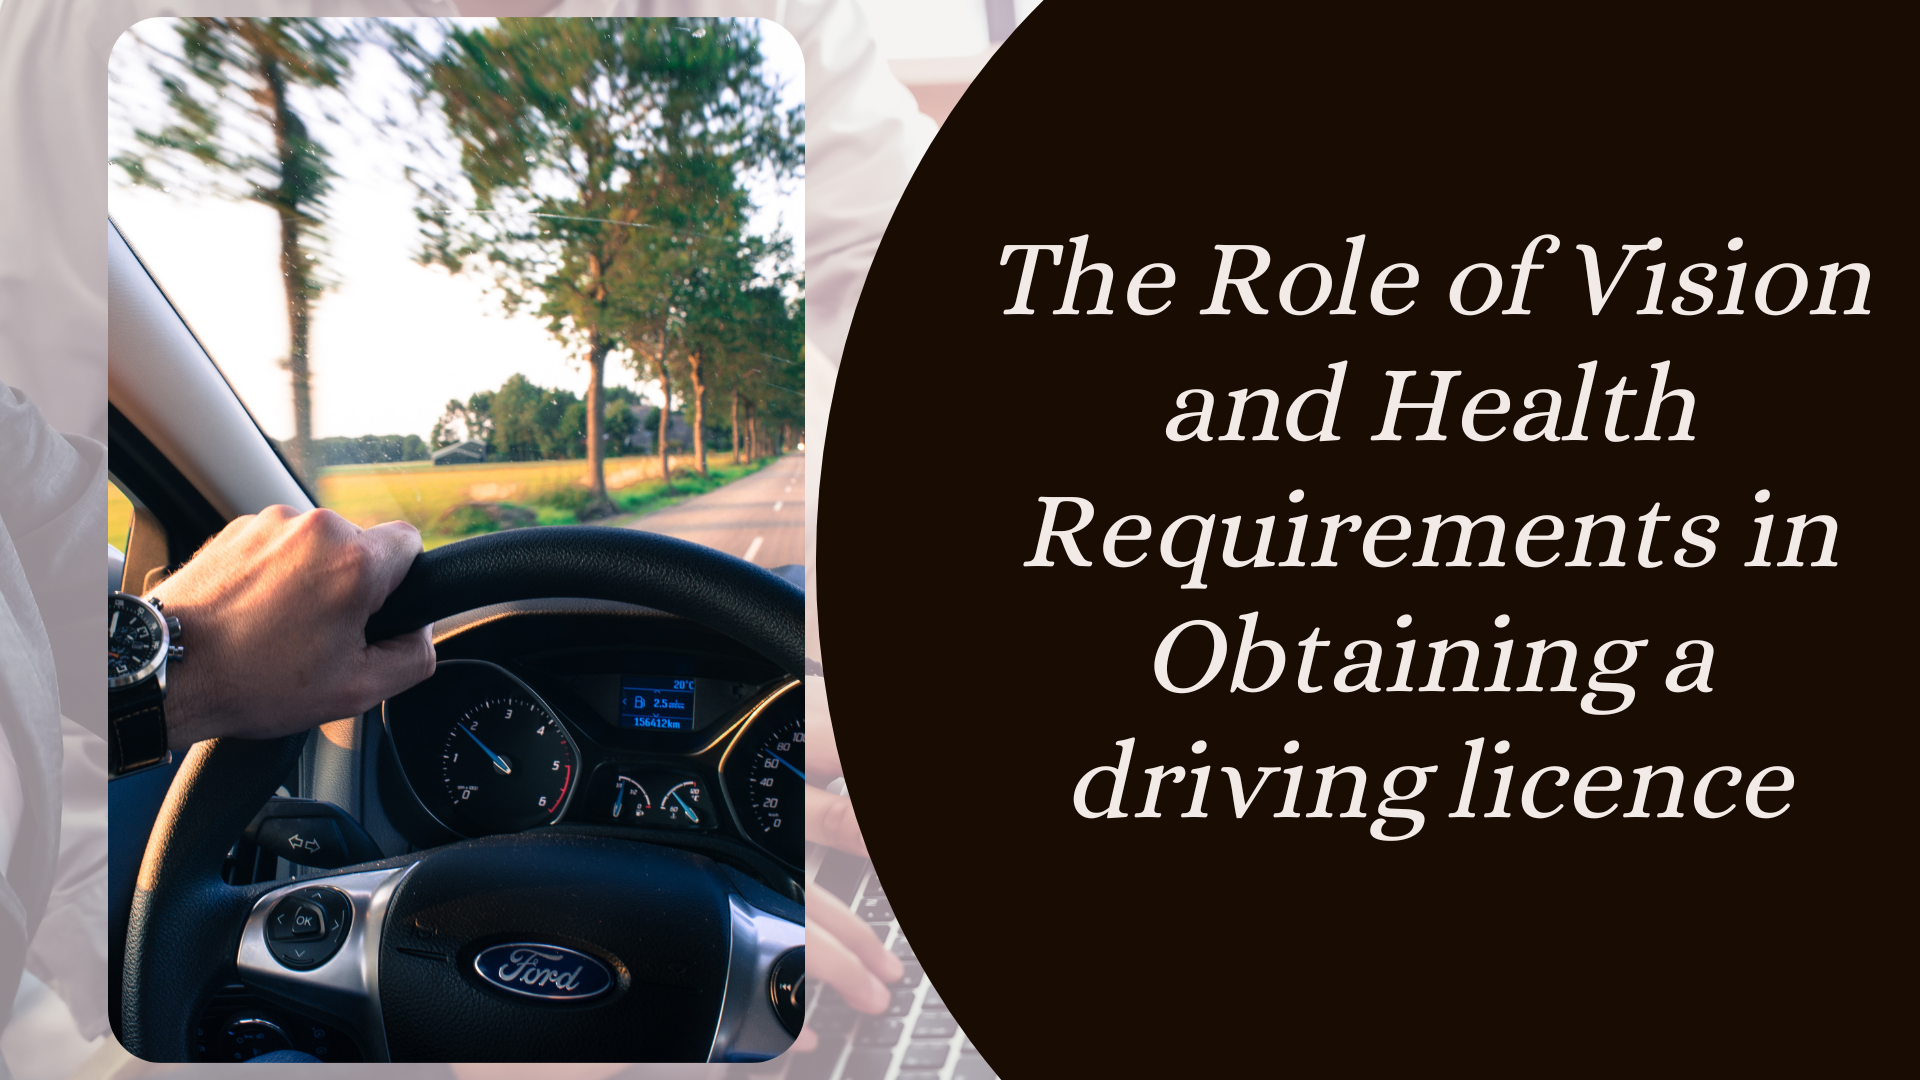 The Role of Vision and Health Requirements in Obtaining a driving licence